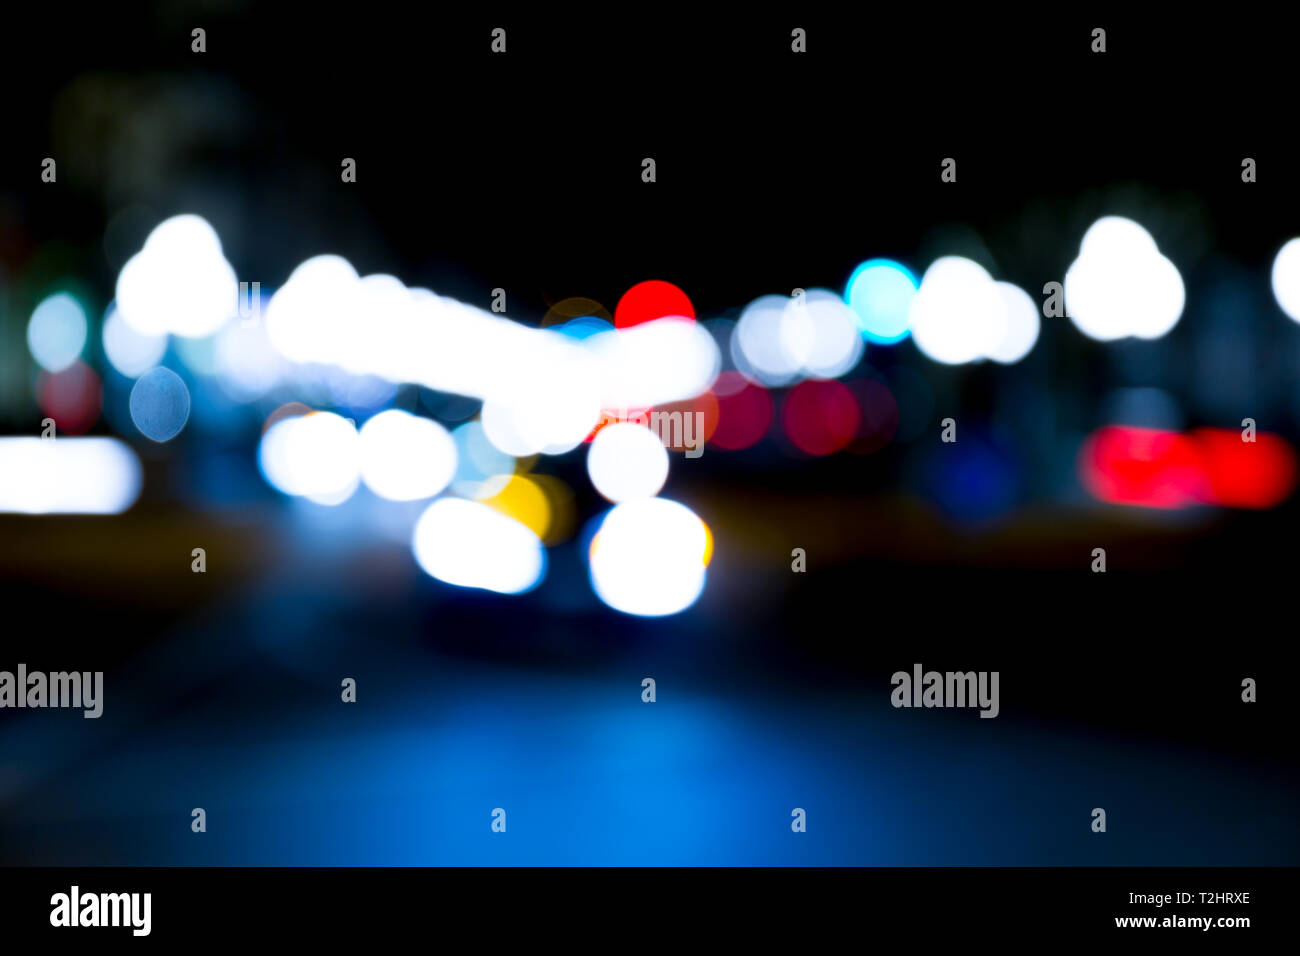 abstract traffic lights on urban street at night, abstract bokeh, blurred motion Stock Photo